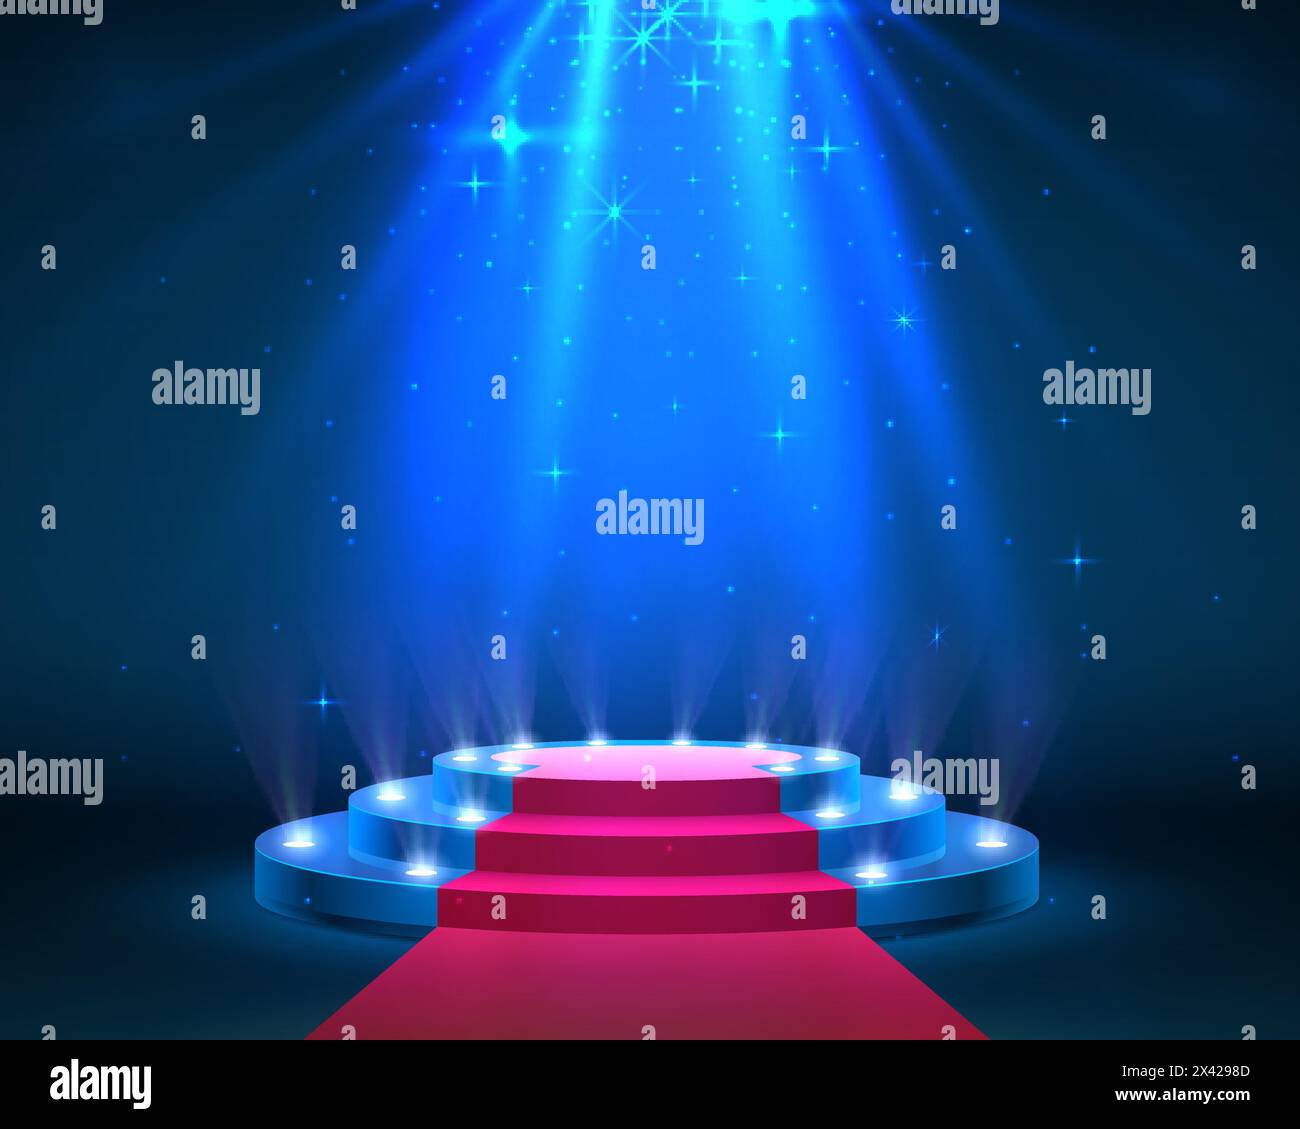 Stage podium with lighting, Stage Podium Scene with for Award Ceremony on blue Background, Vector illustration Stock Vector